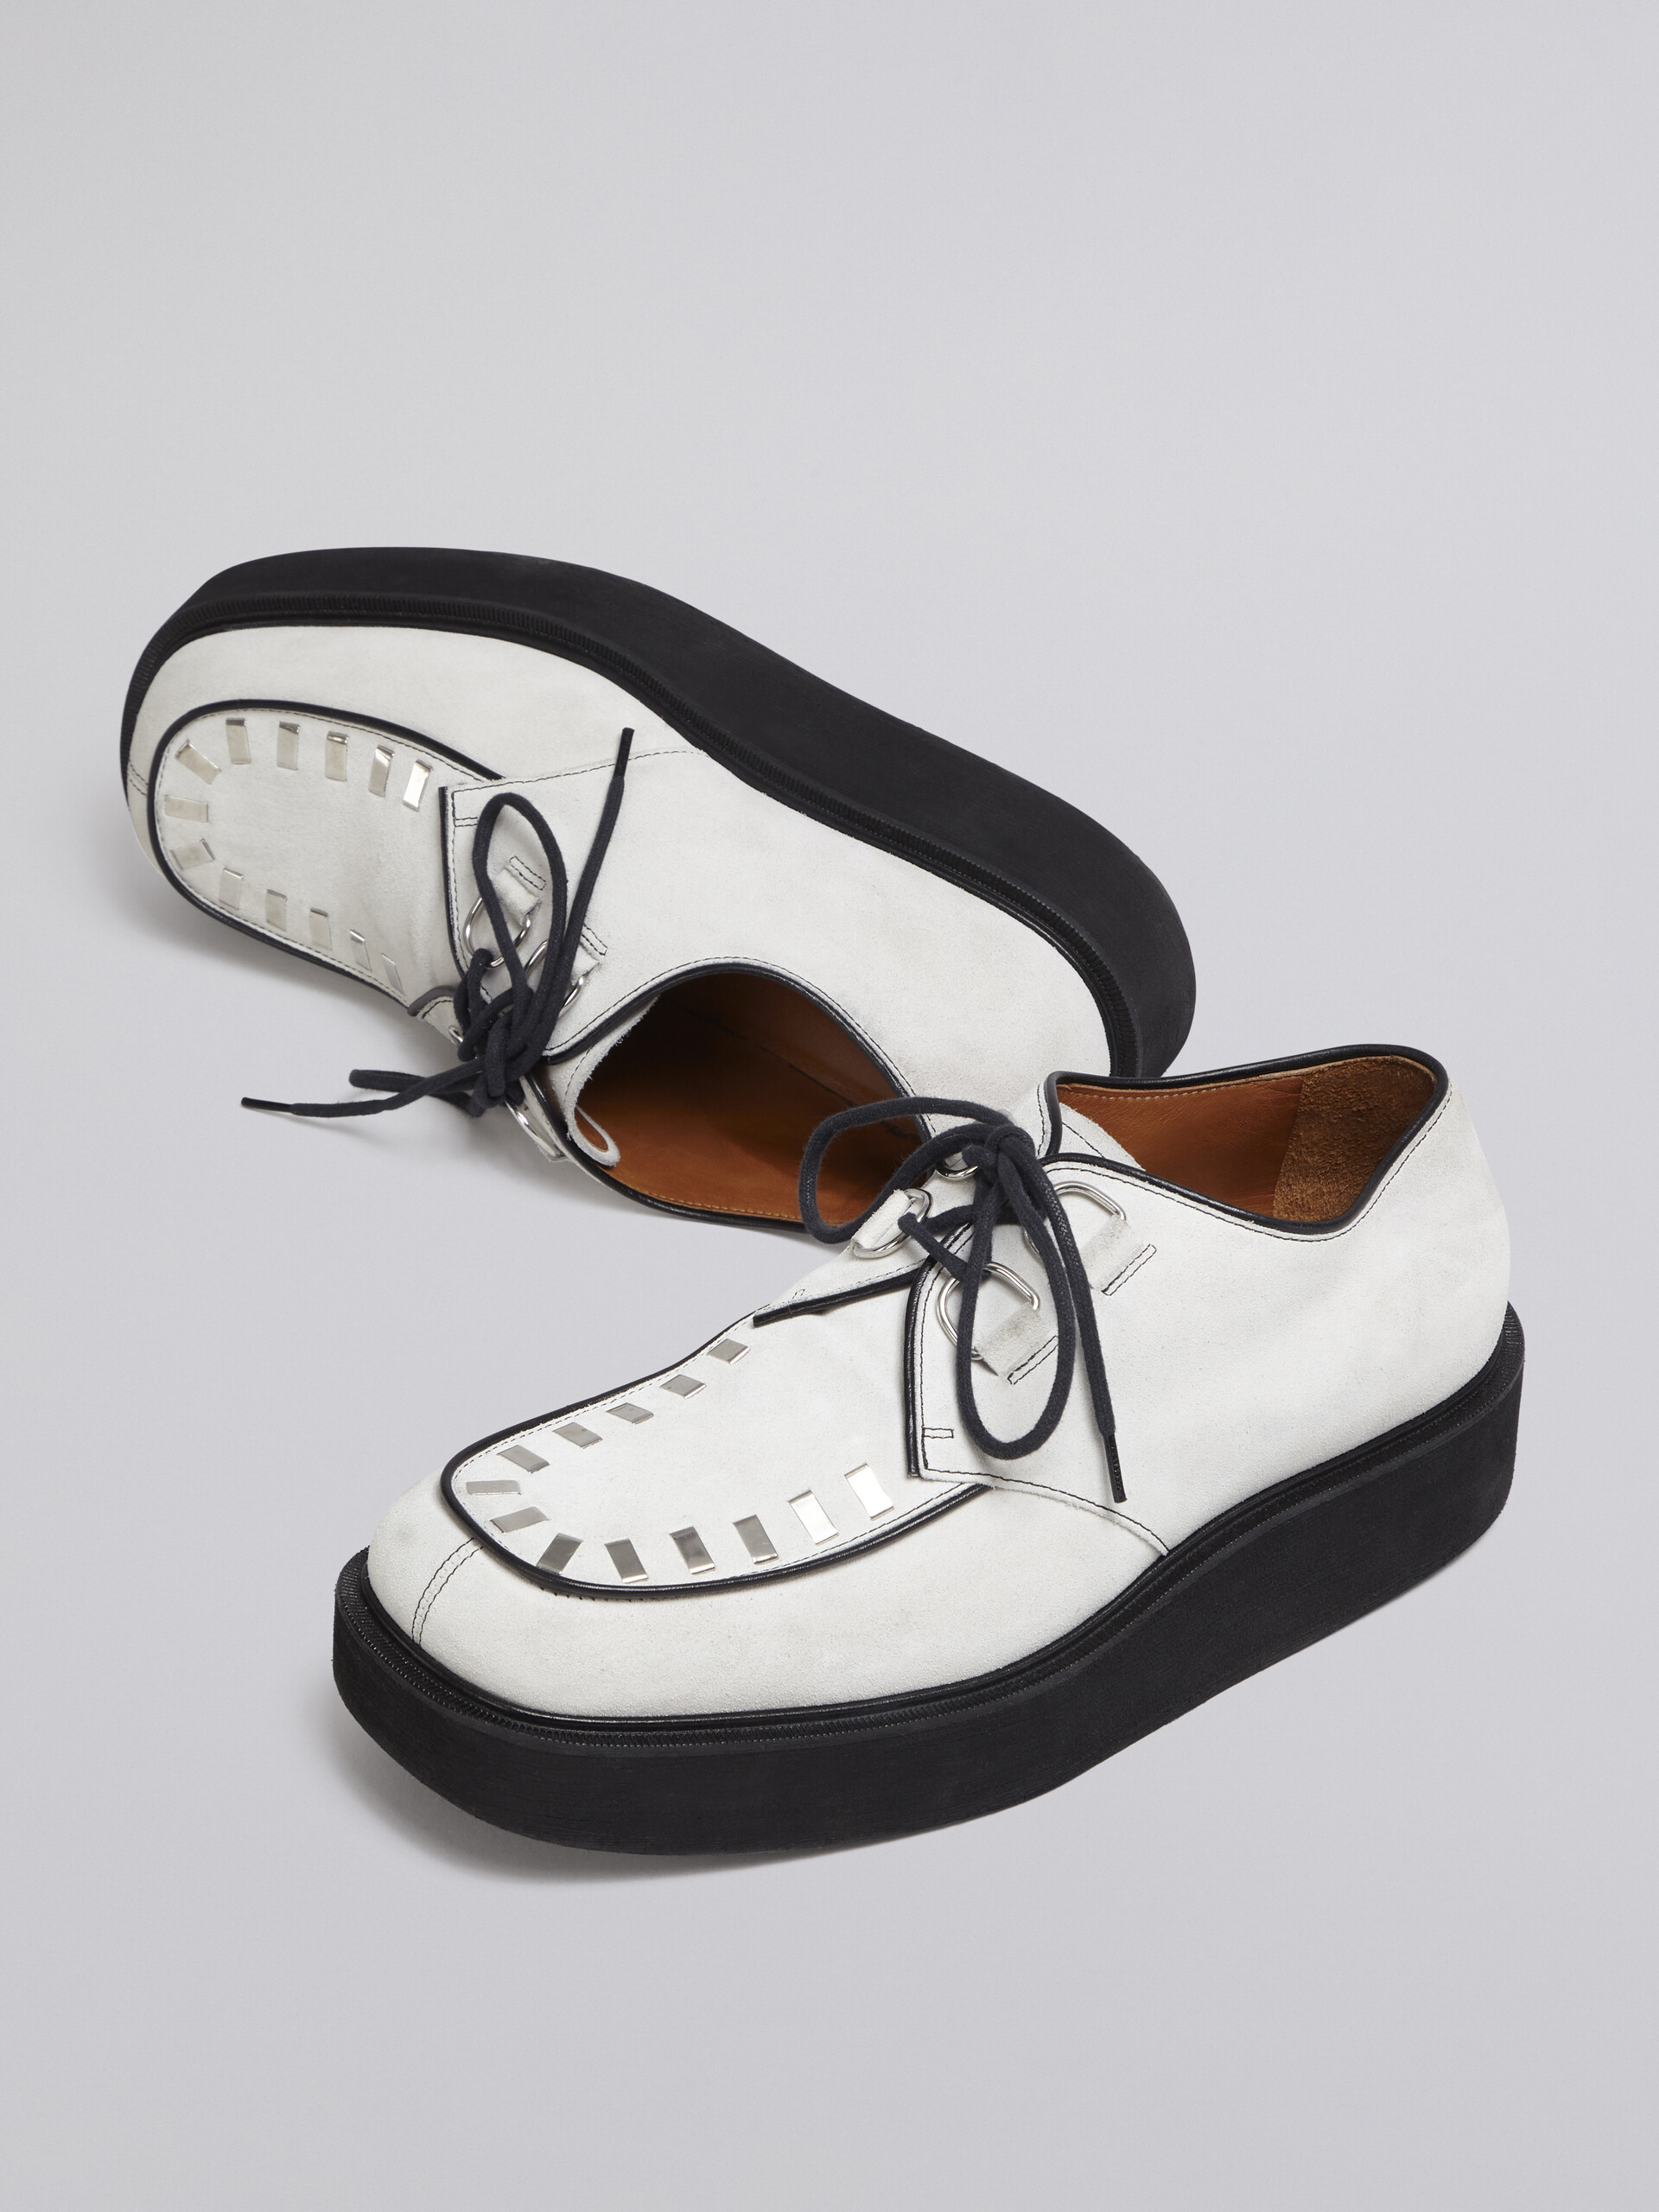 Calfskin lace-up with square toe - Lace-ups - Image 5